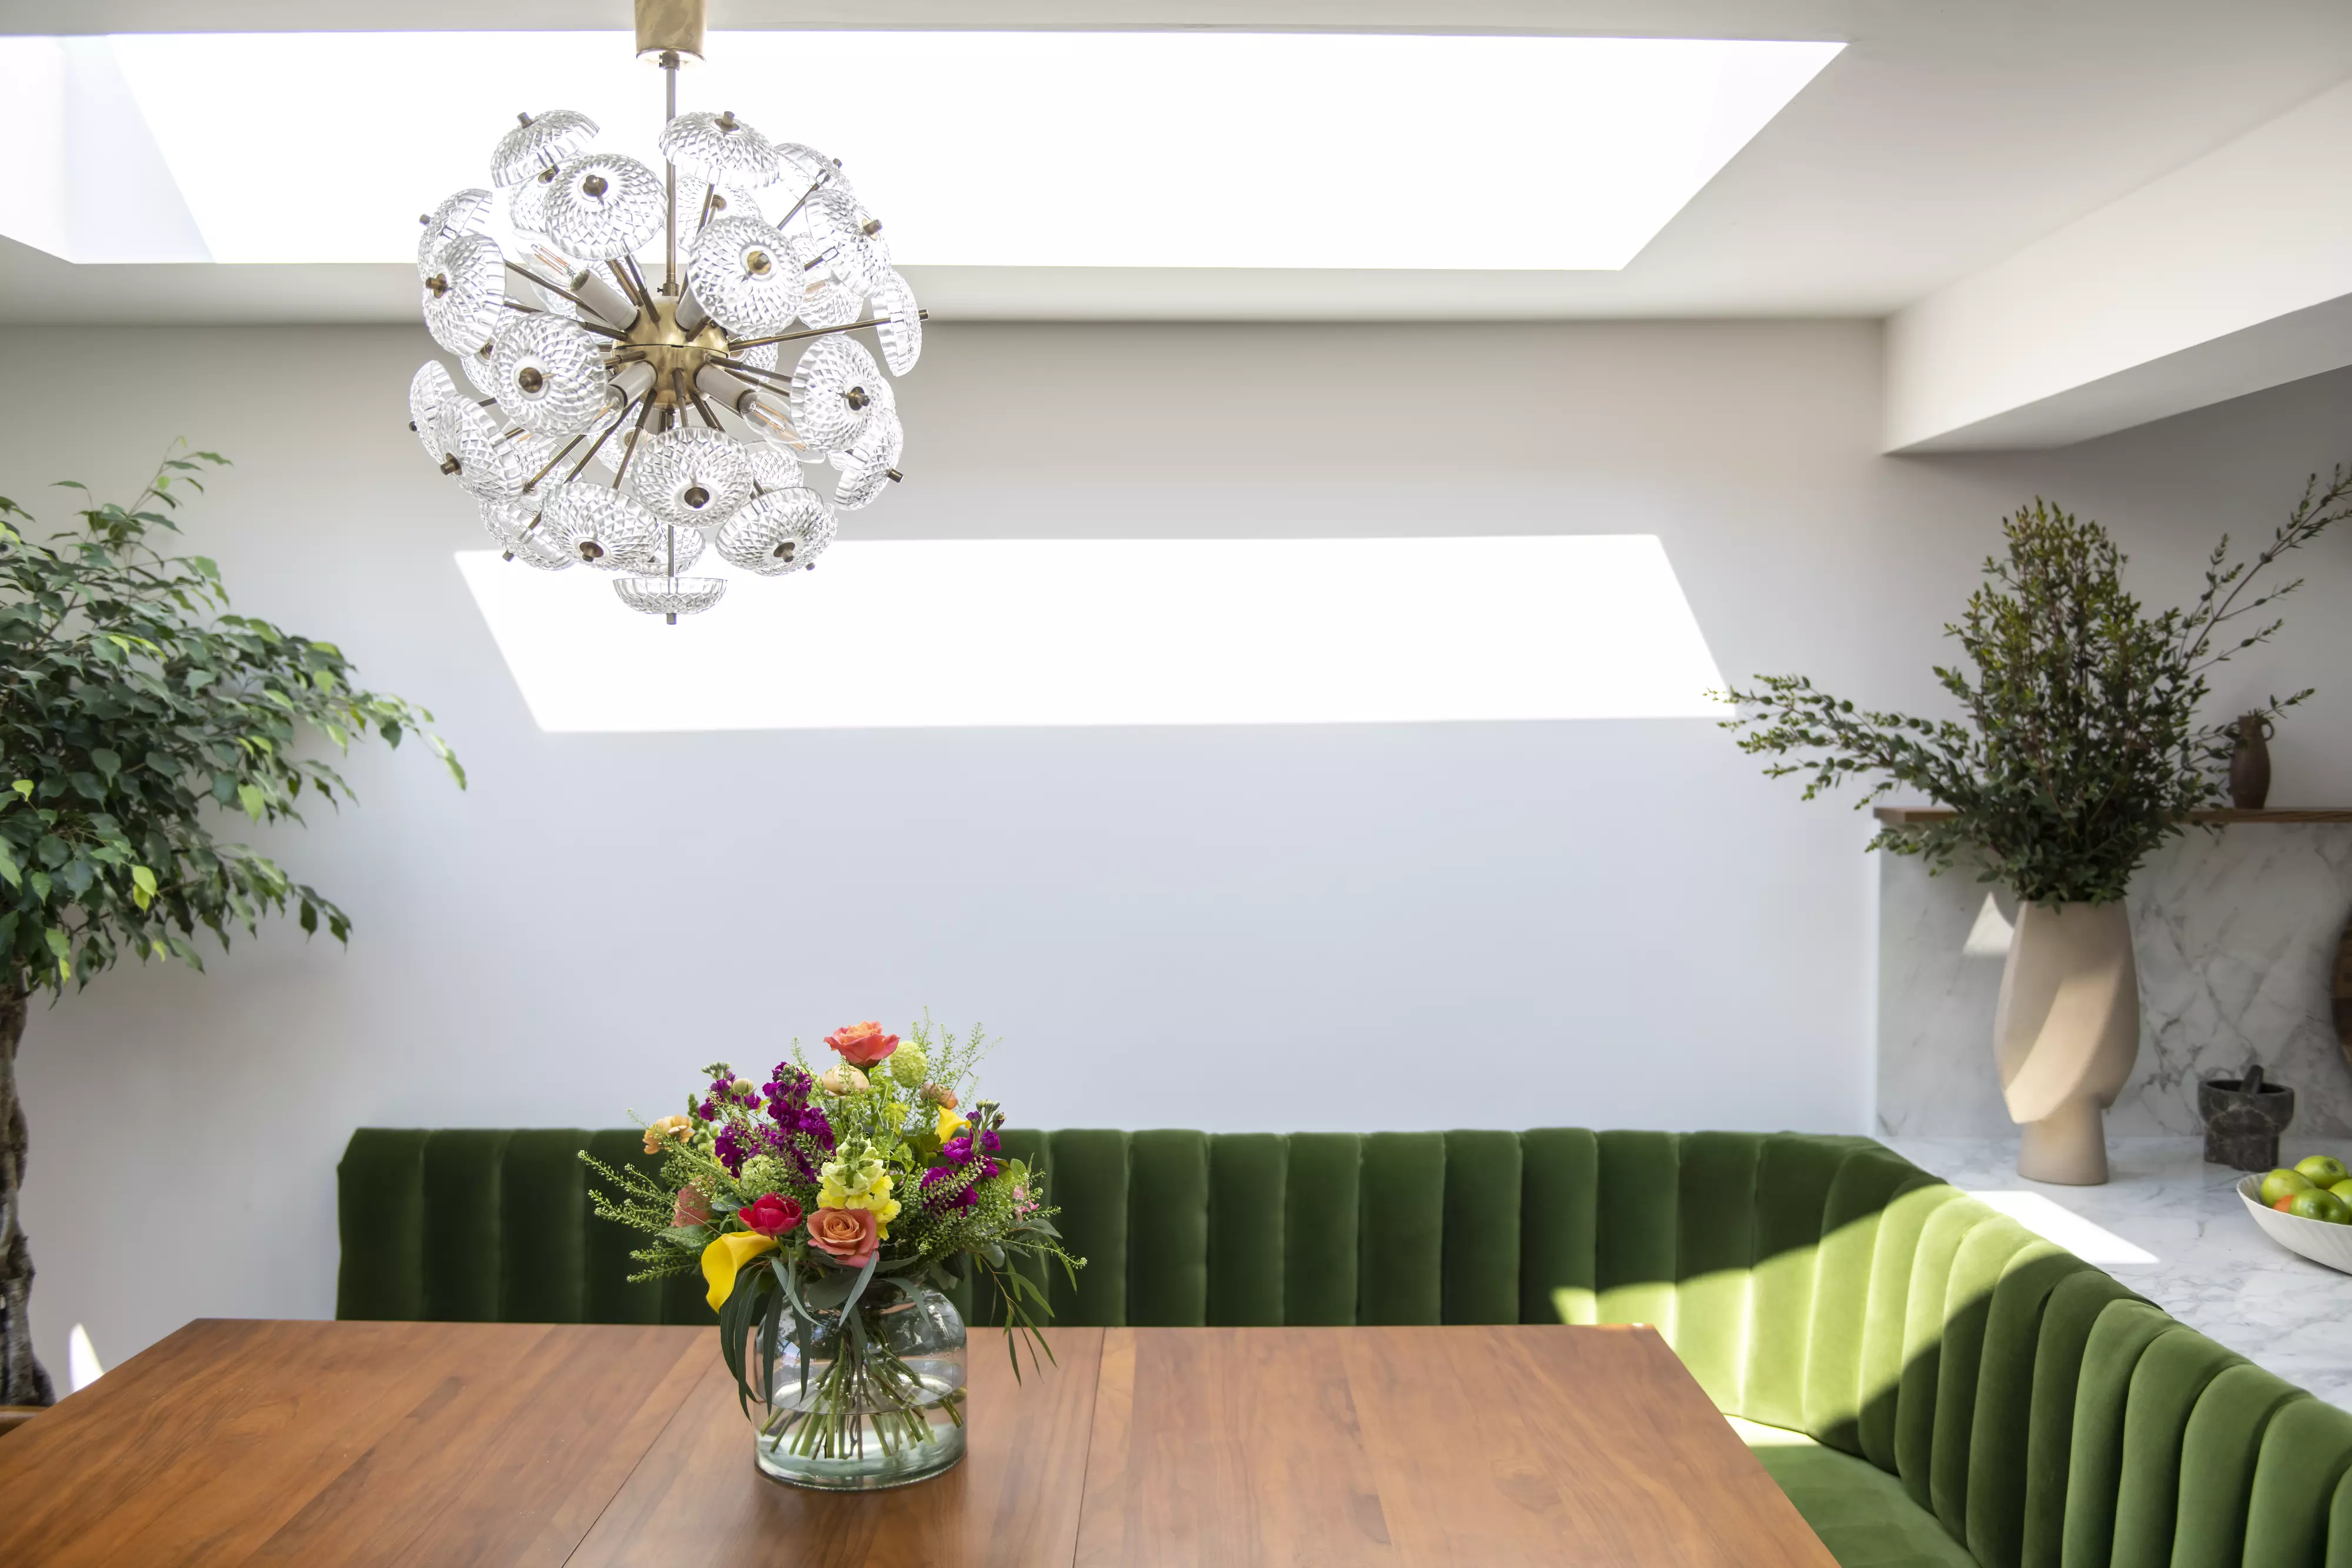 Chic dining room with VELUX windows, green banquette, and chandelier.